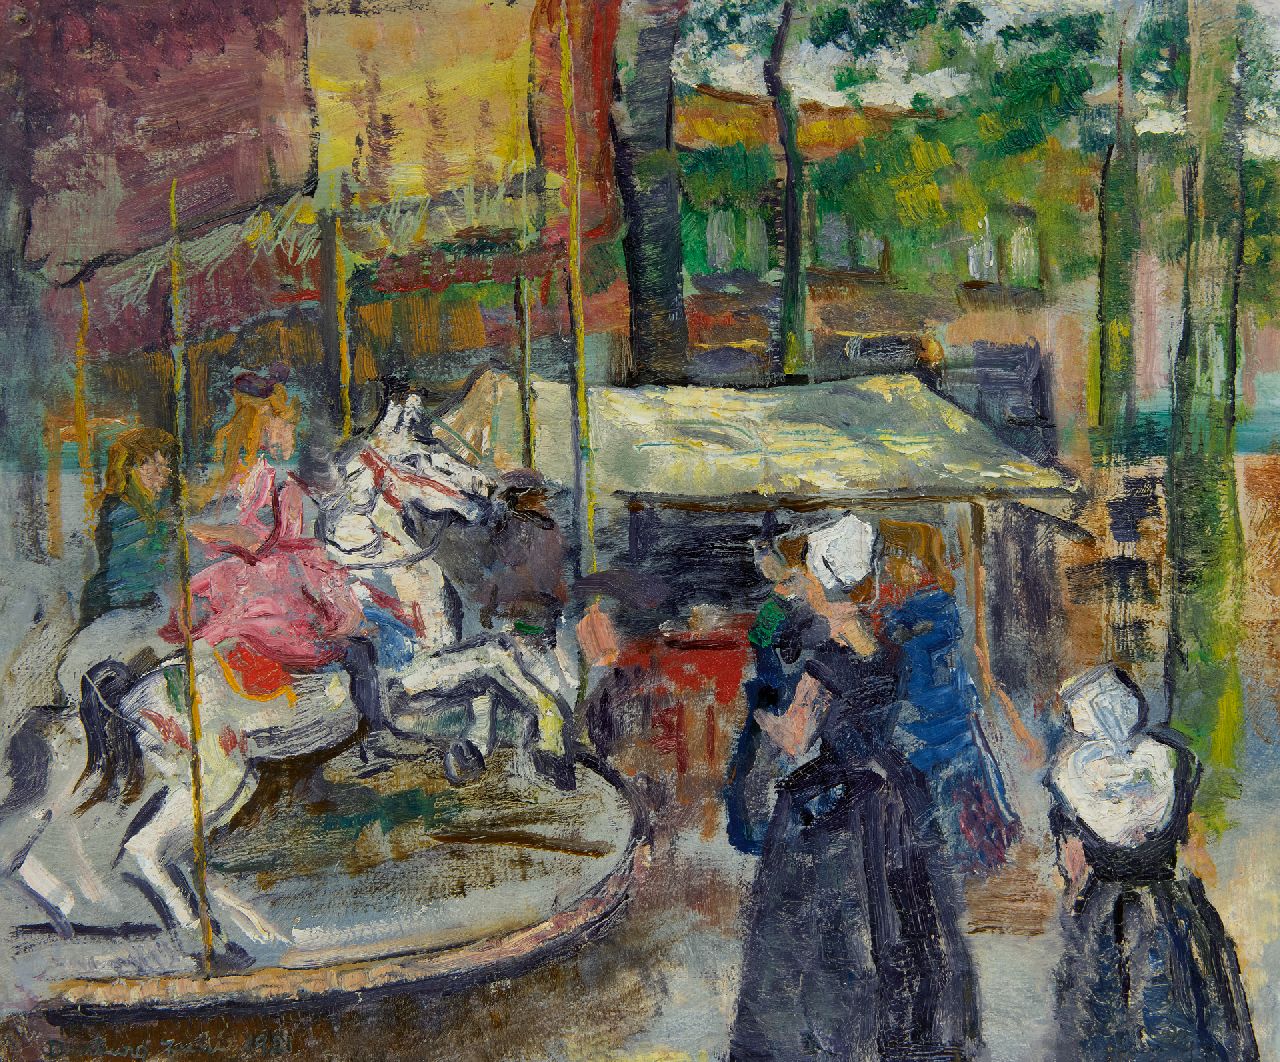 Góth C.  | Charlotte 'Sarika' Góth, At the fair in Domburg, oil on paper laid down on board 30.5 x 36.7 cm, signed l.r. and dated 'Juli 1921'